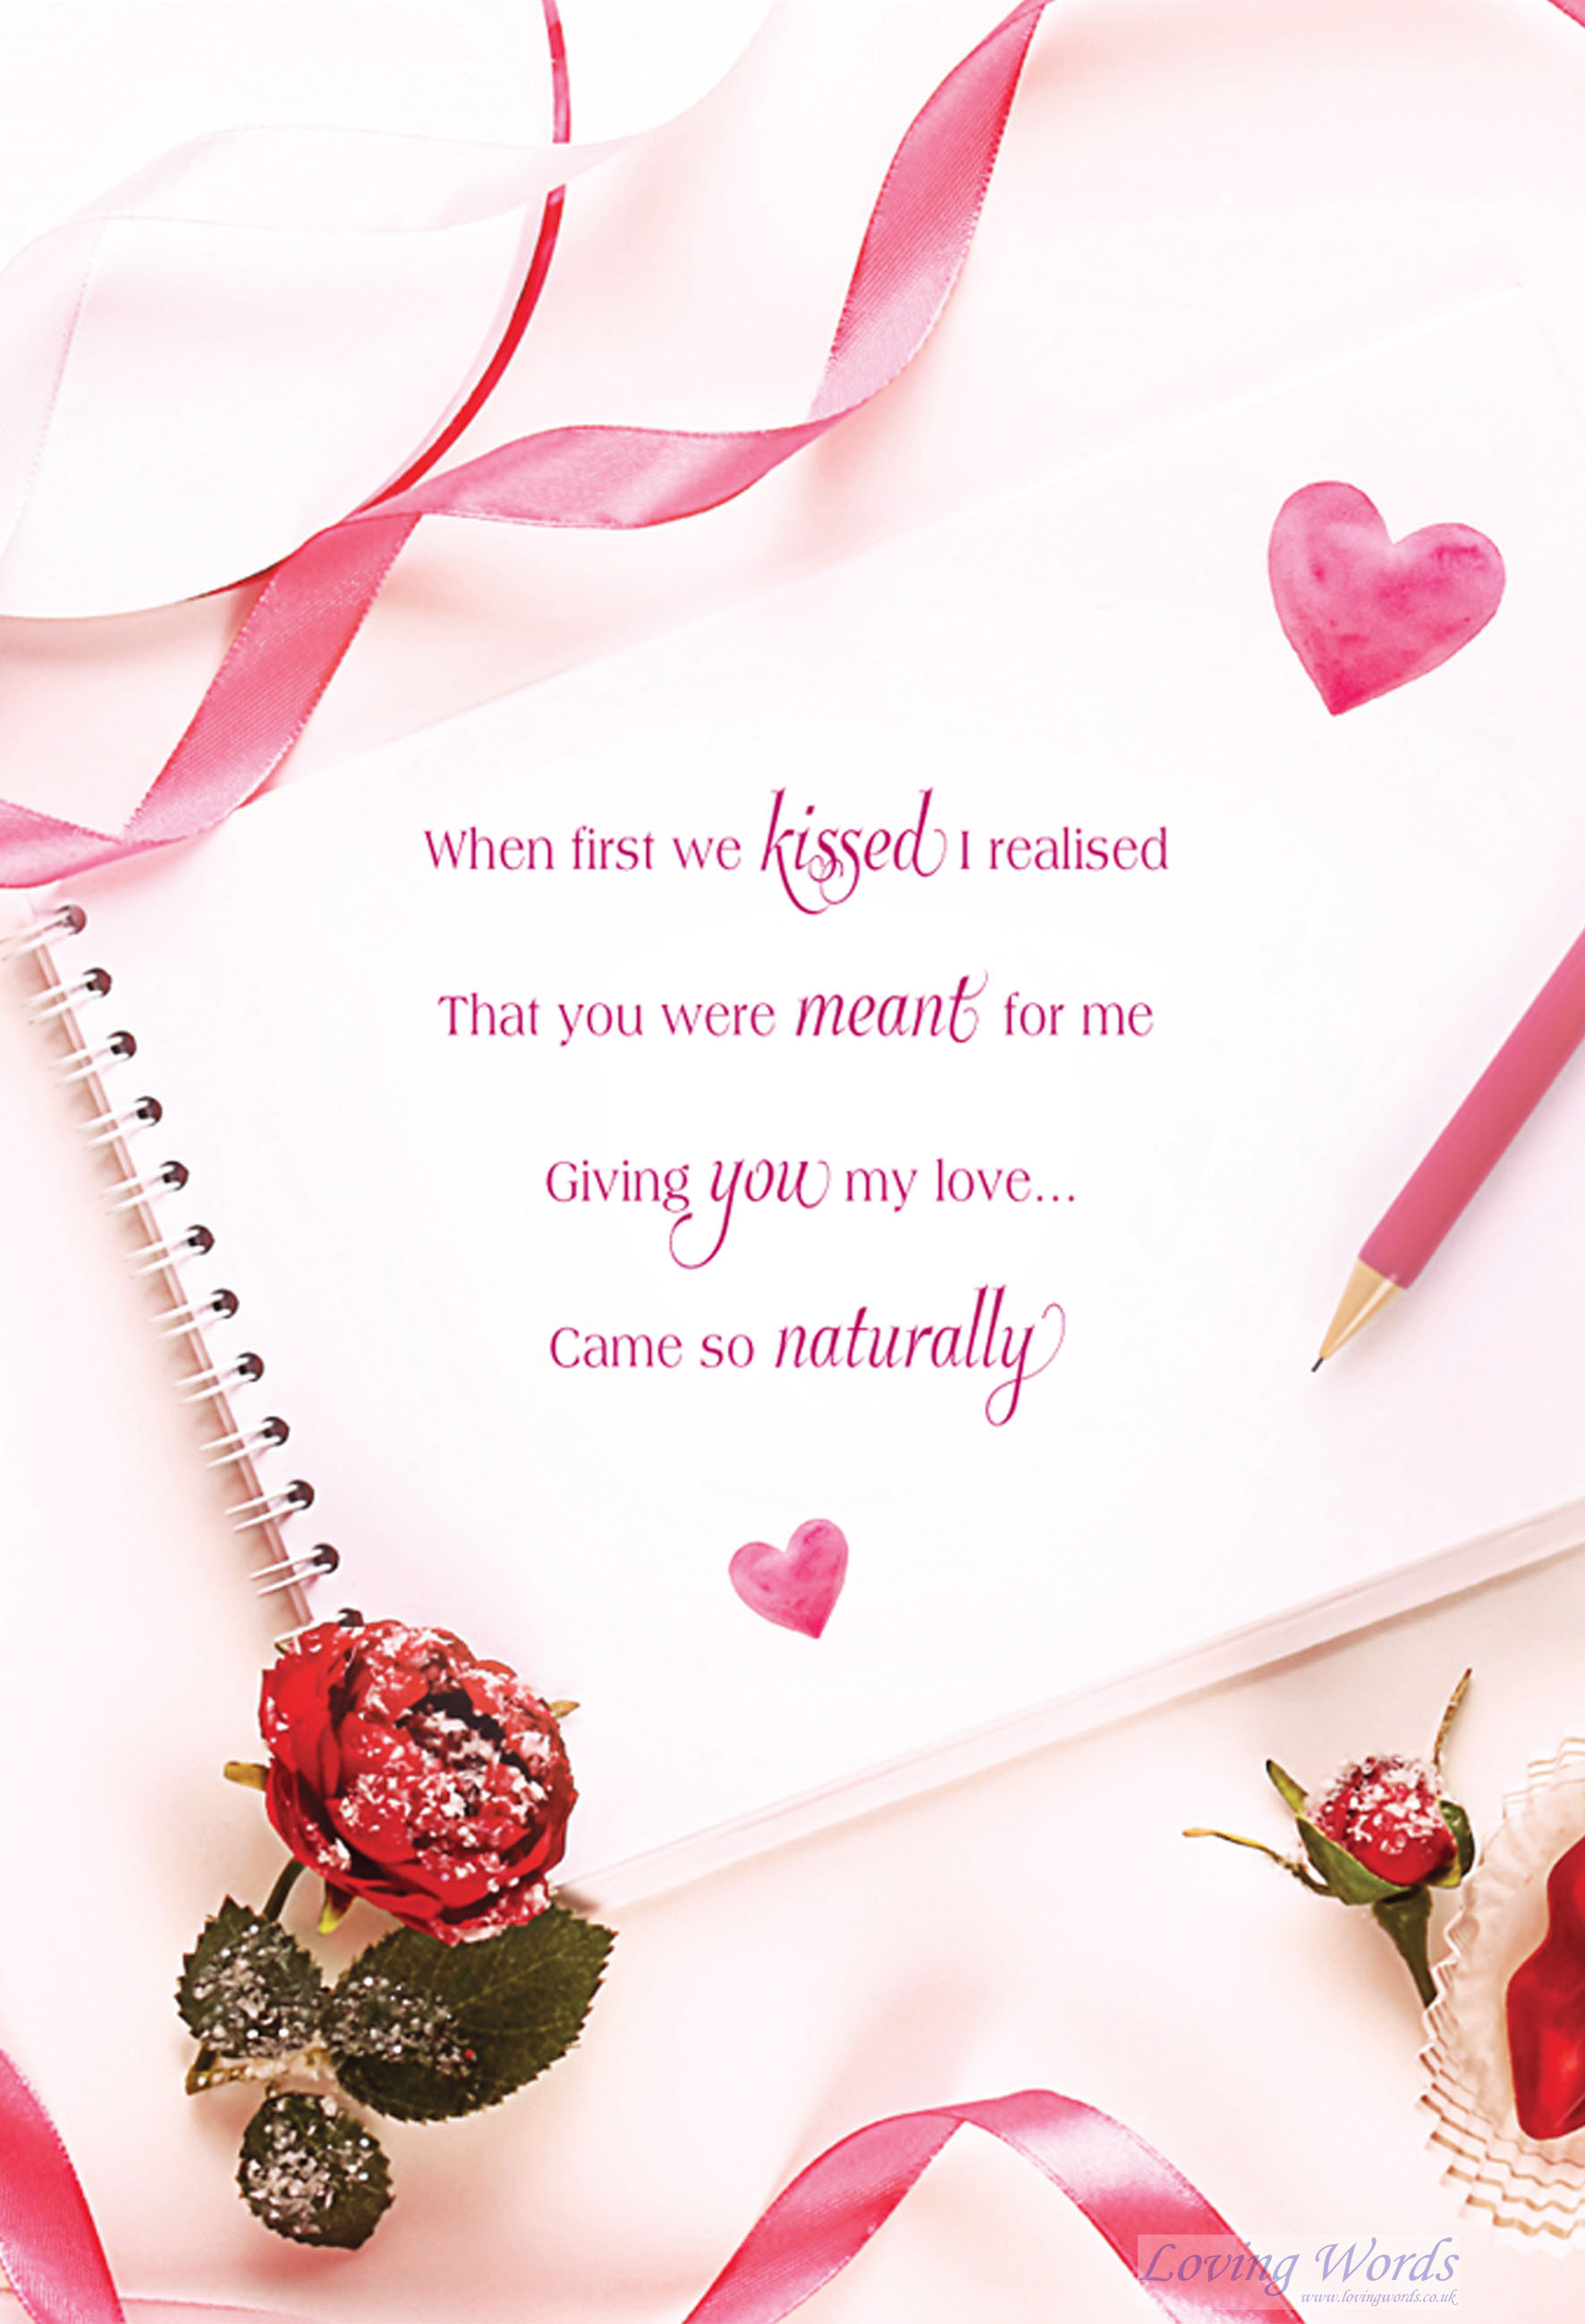 With Love to my Wife on Valentine's Day | Greeting Cards by Loving Words